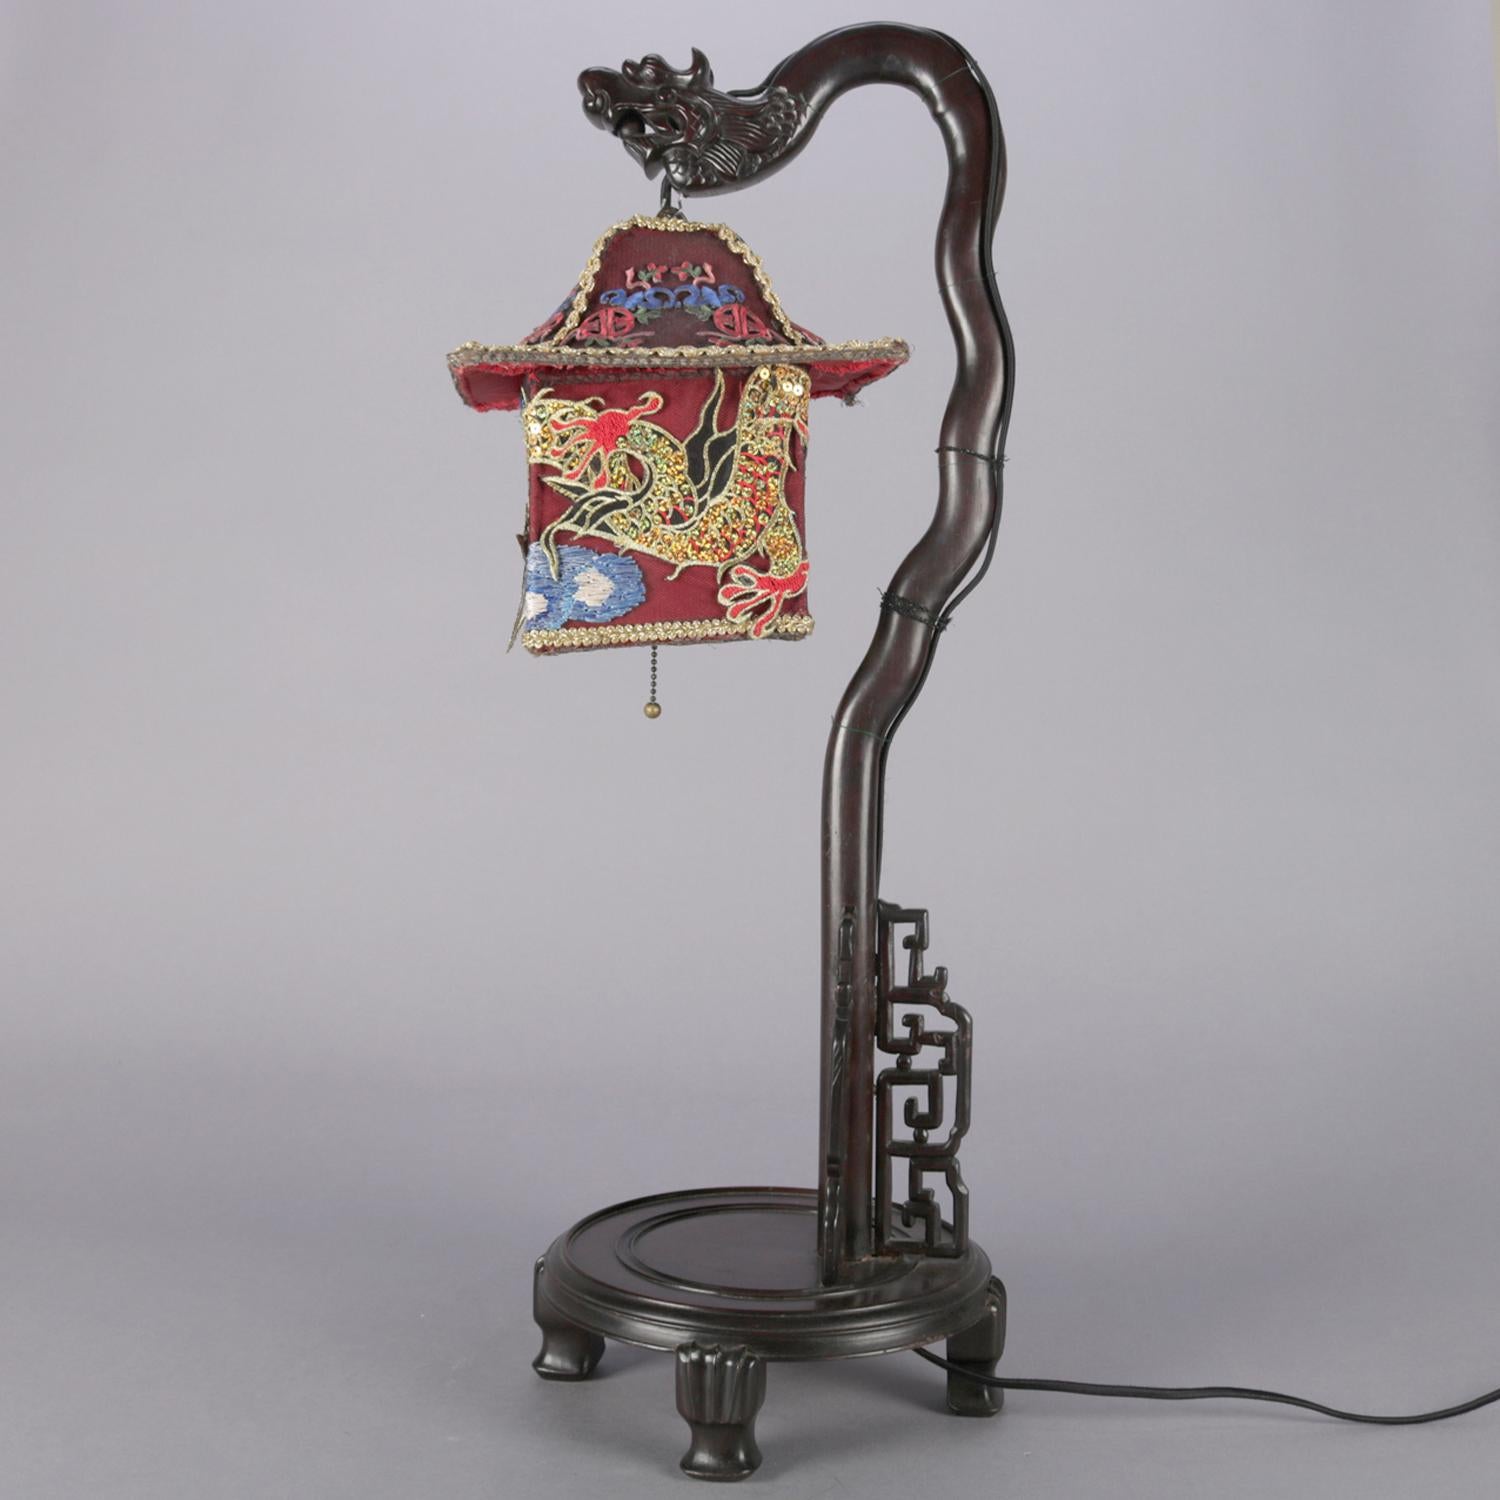 Textile Chinese Figural Carved Hardwood Dragon Desk Lamp, Embroidered Pagoda Shade